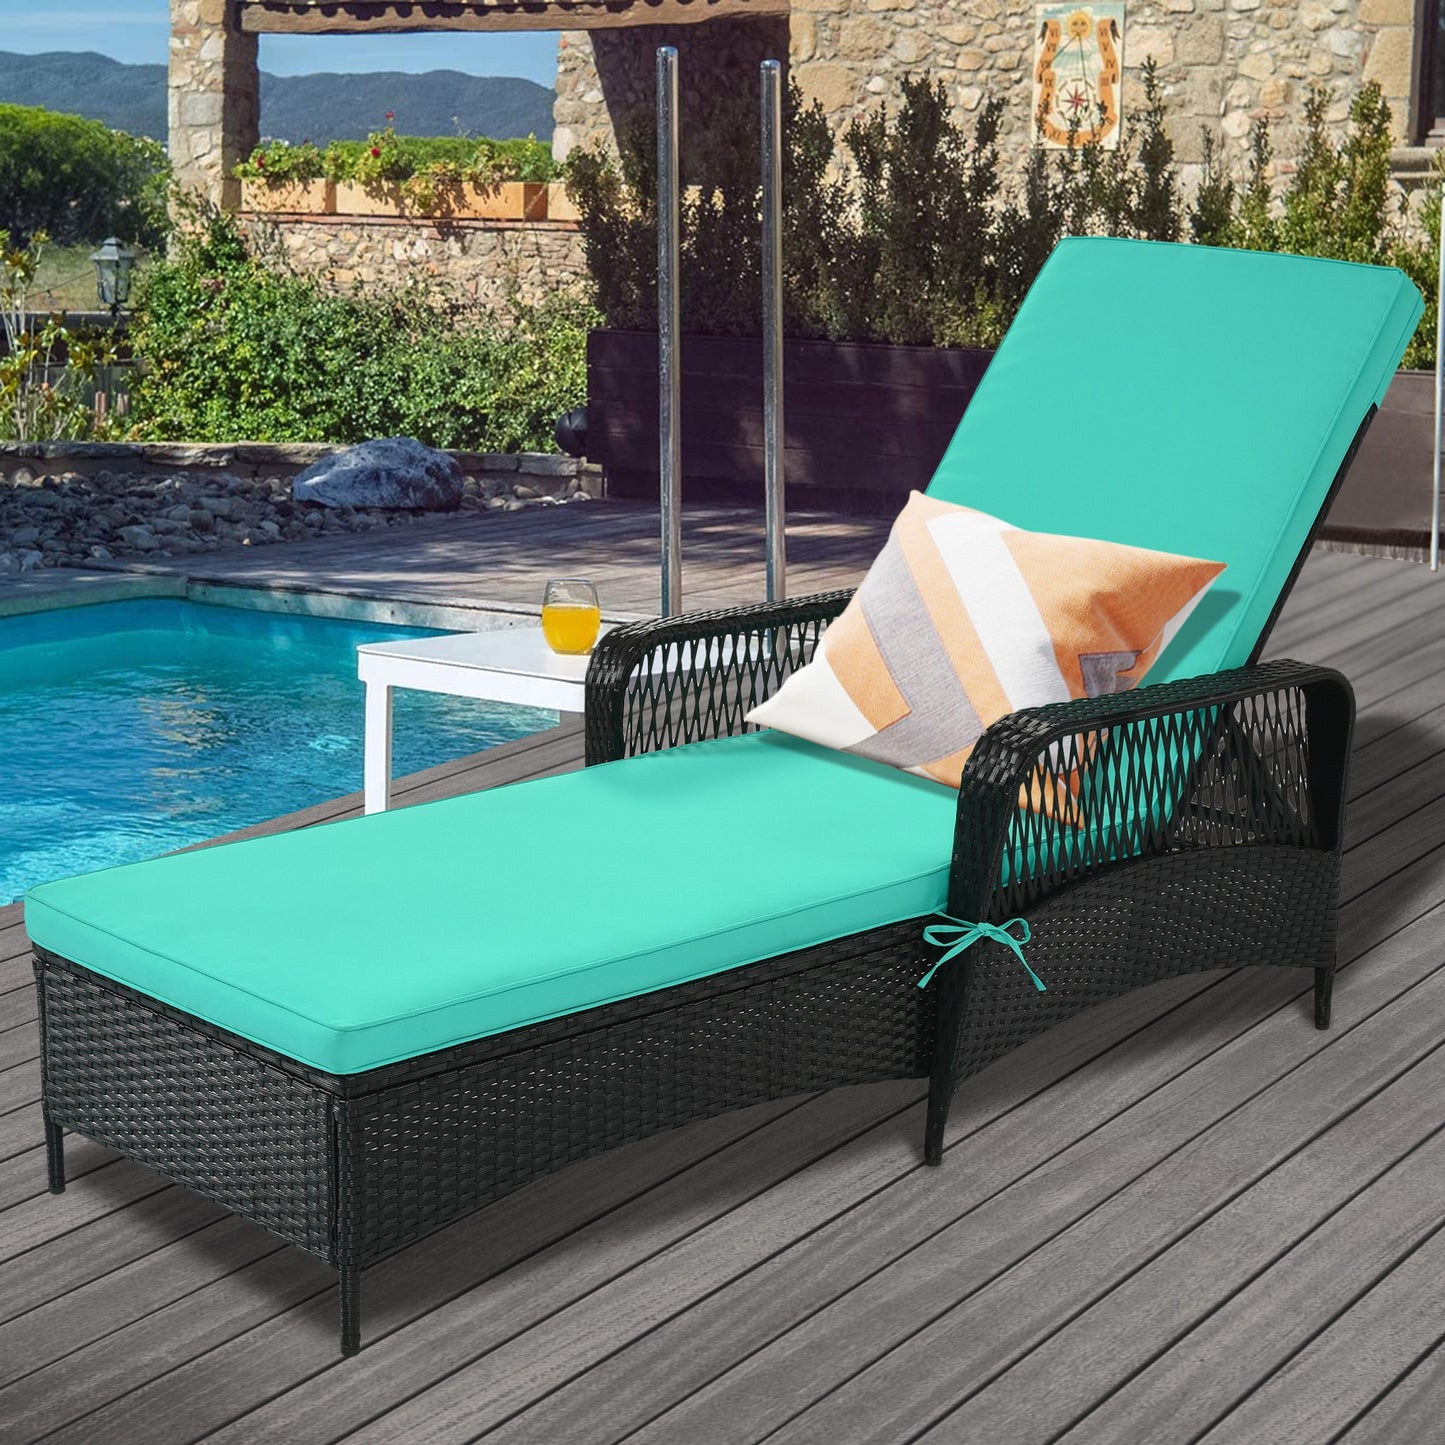 Outdoor PE Rattan Wicker Chaise Lounge, Patio Rattan Reclining Chair Furniture, Beach Pool Adjustable Backrest Recliners with Green Cushions